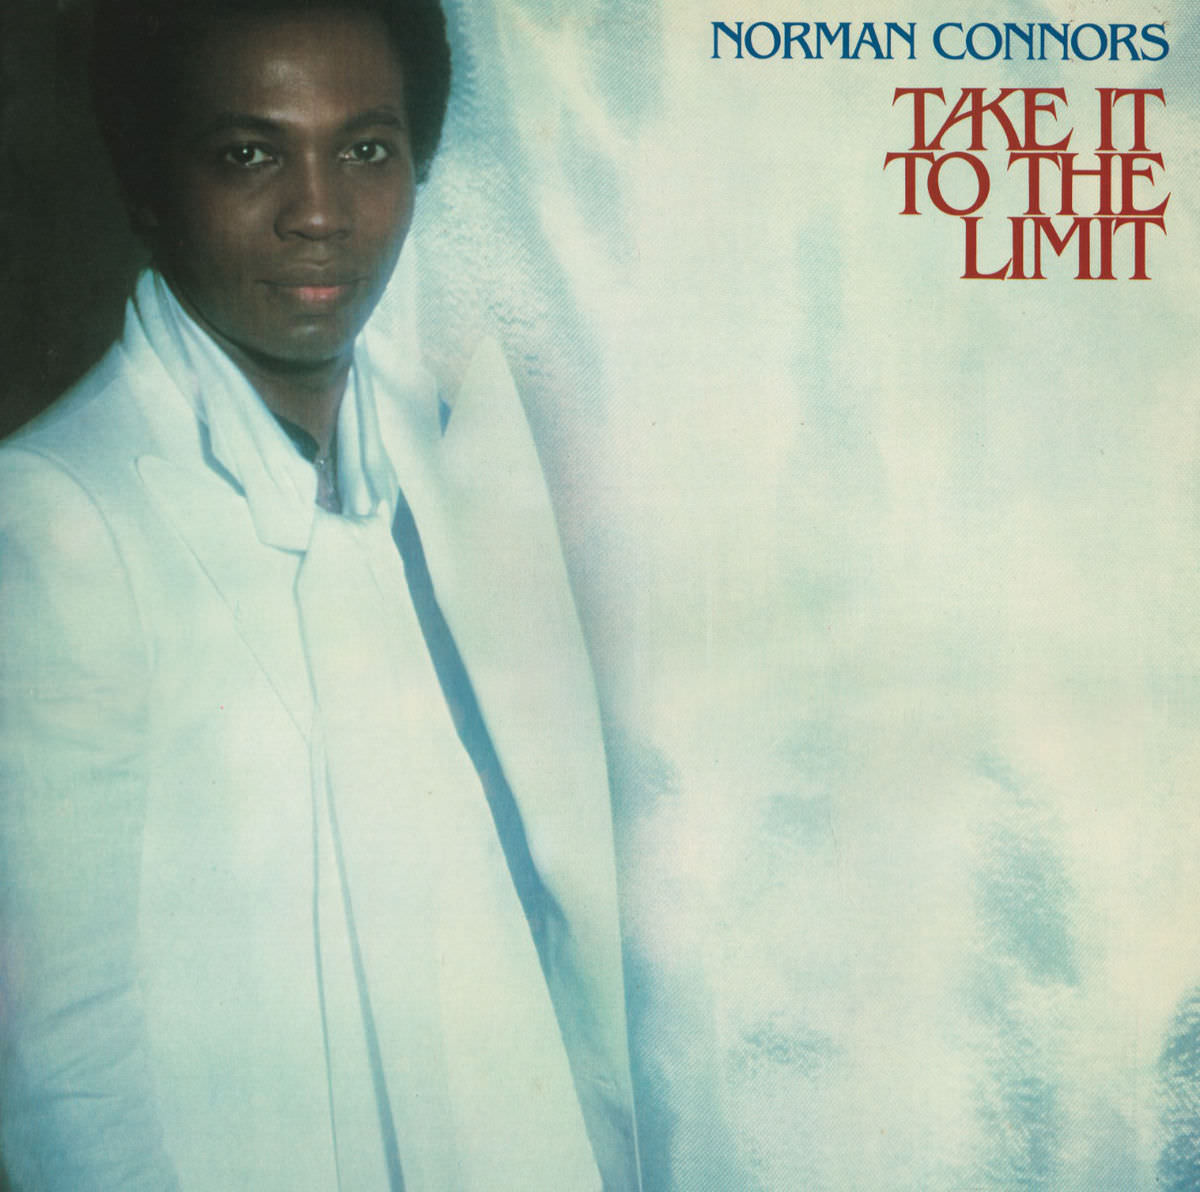 Norman Connors – Take It To The Limit (Expanded Edition) (1980/2015) [FLAC 24bit/96kHz]